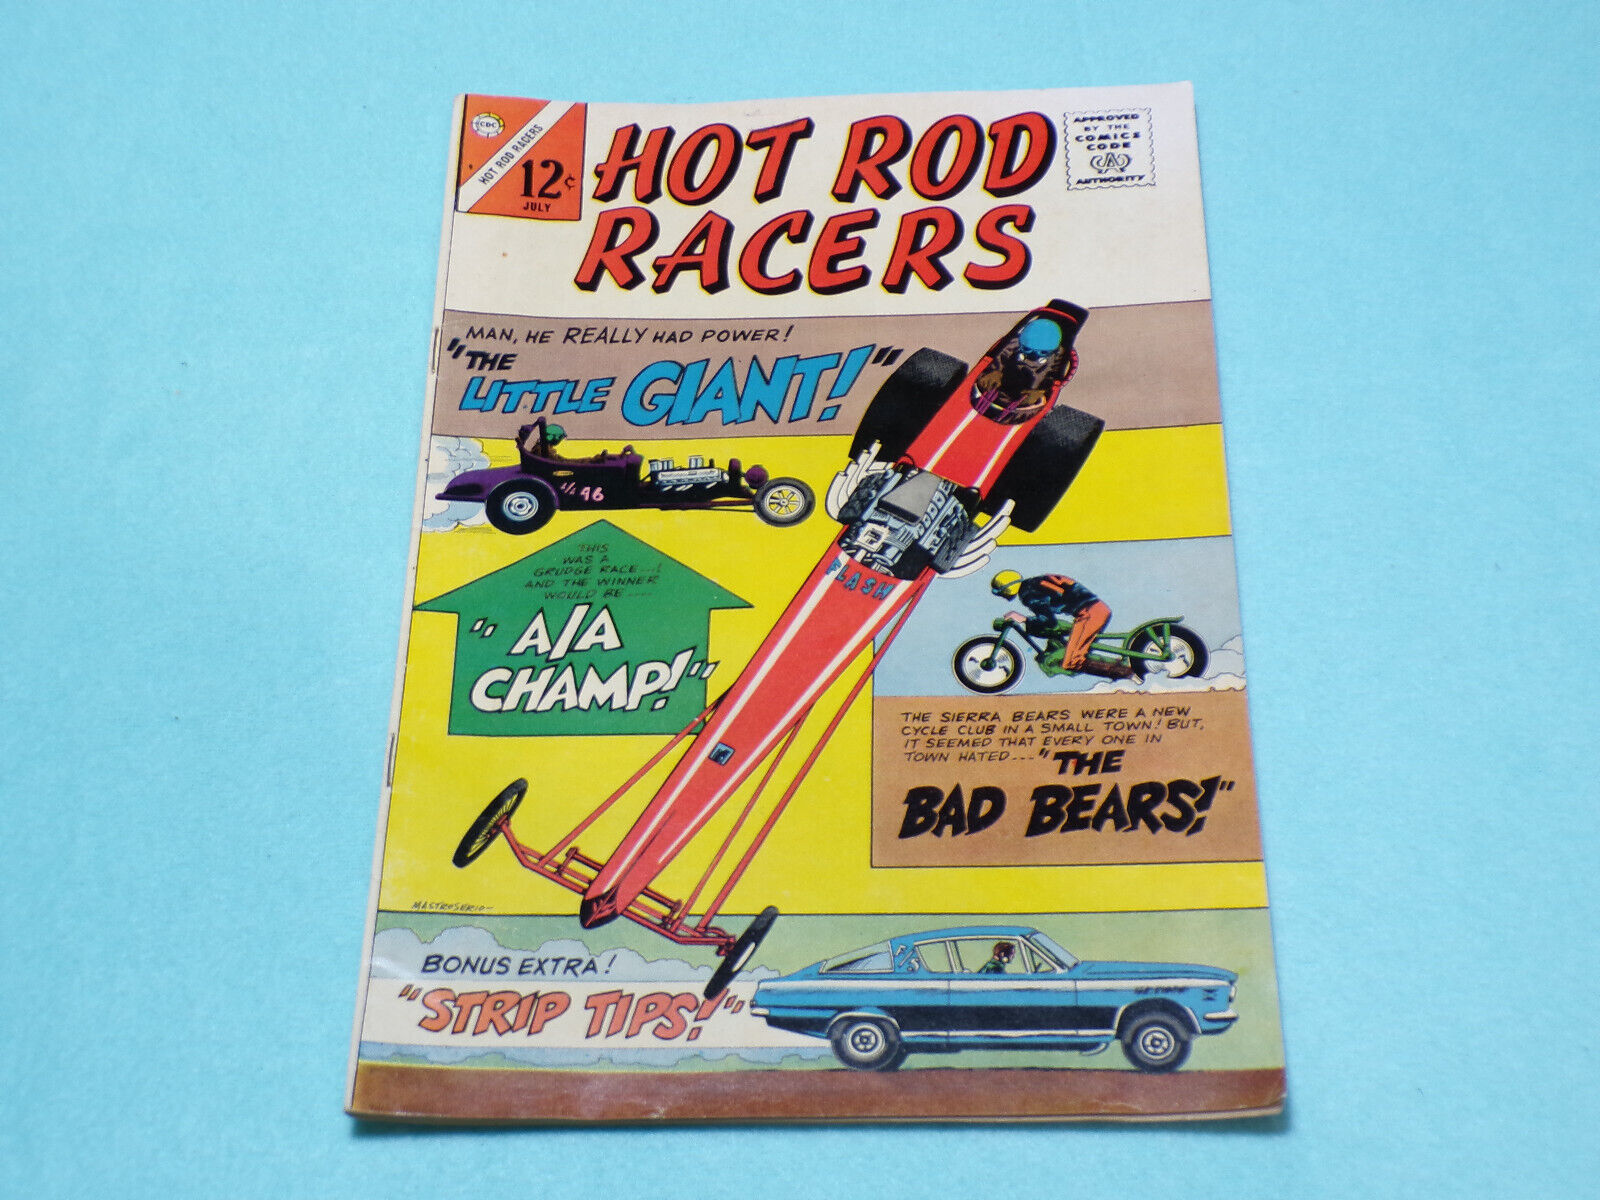 1966 Charlton Comics, Hot Rod Racers Vol. 1 Number 9. VG to Fine